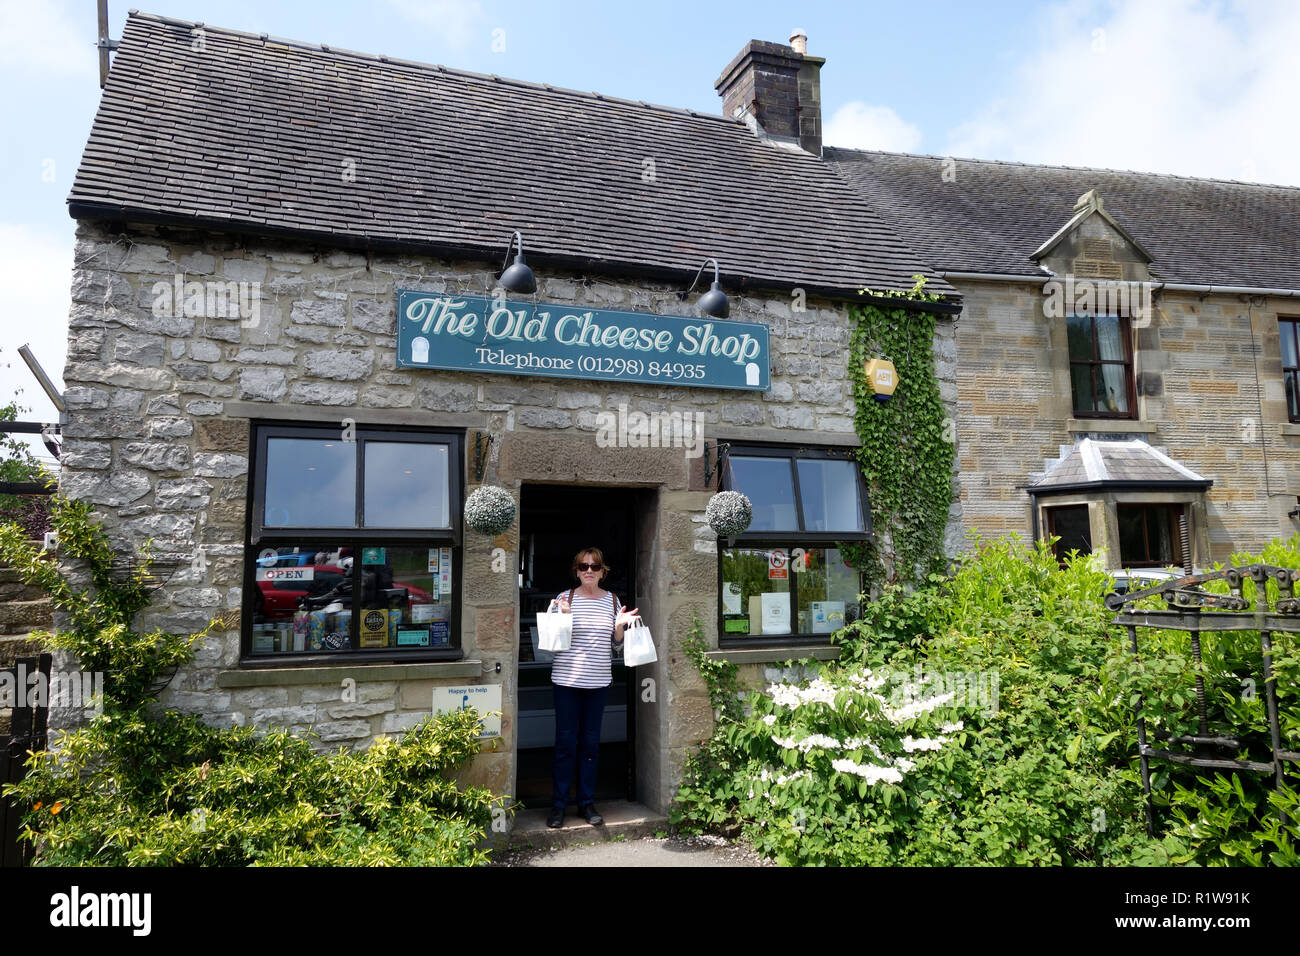 The Old Cheese Shop in Hartington in the Peak District Uk Stock Photo